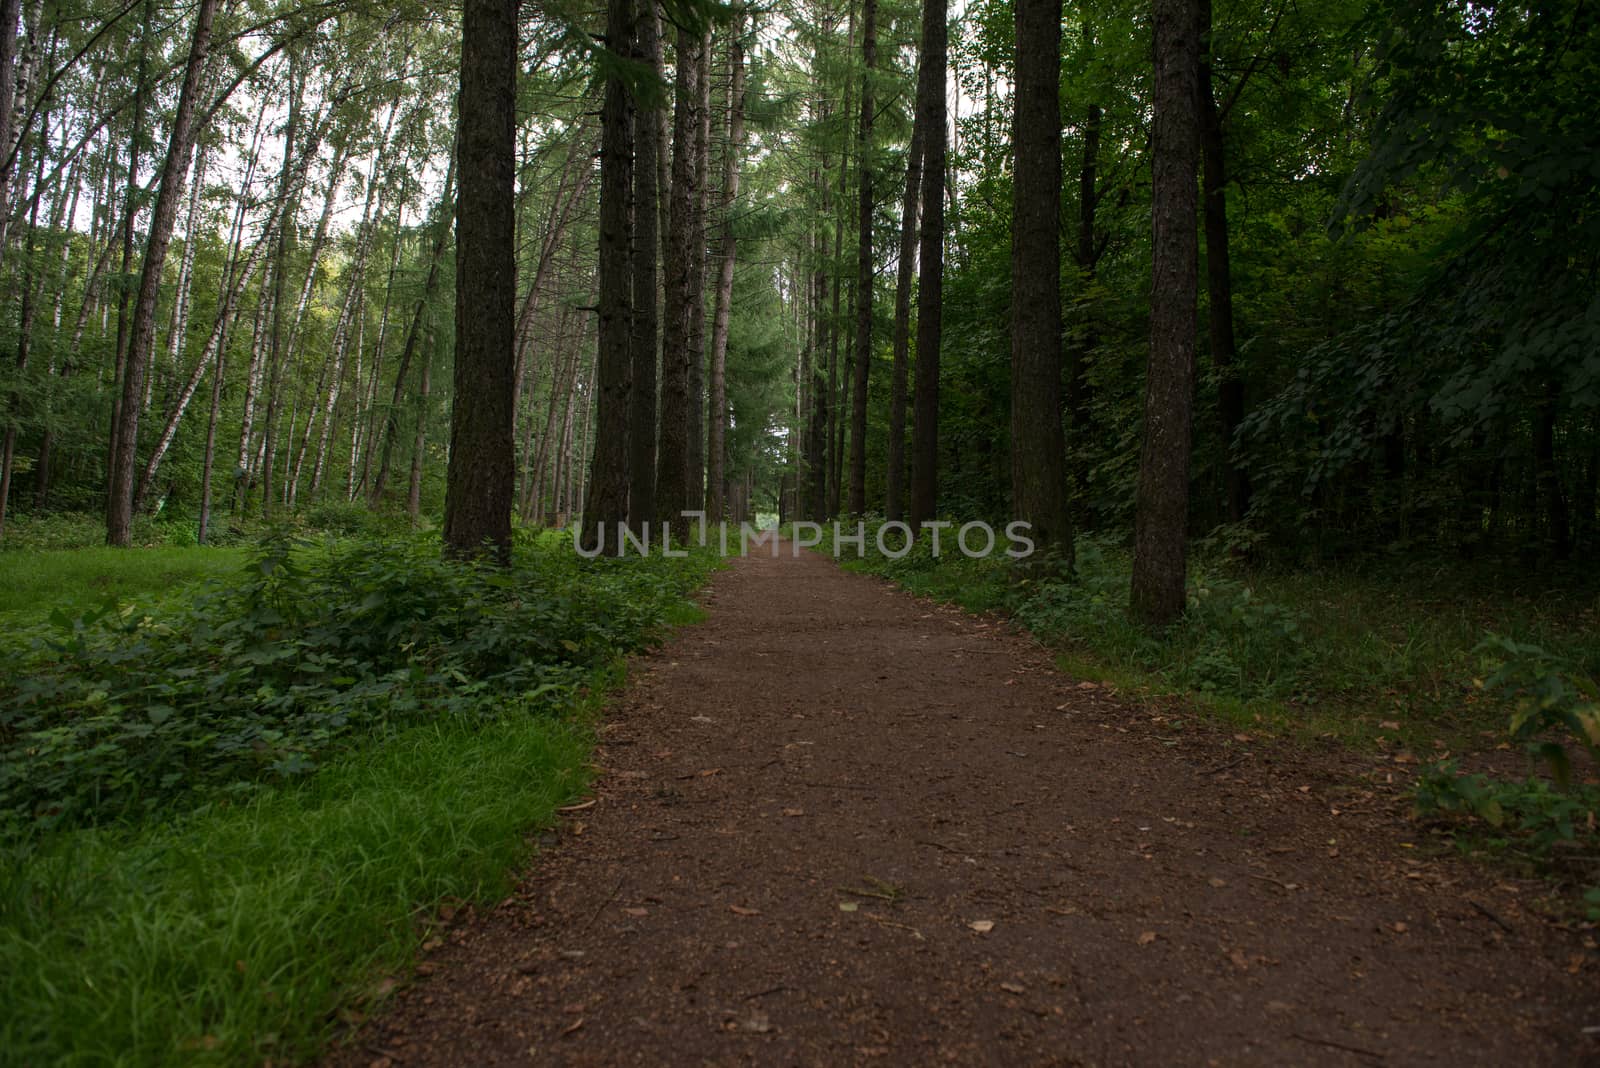 Personal perspective of walking on a path in the forest by marynkin